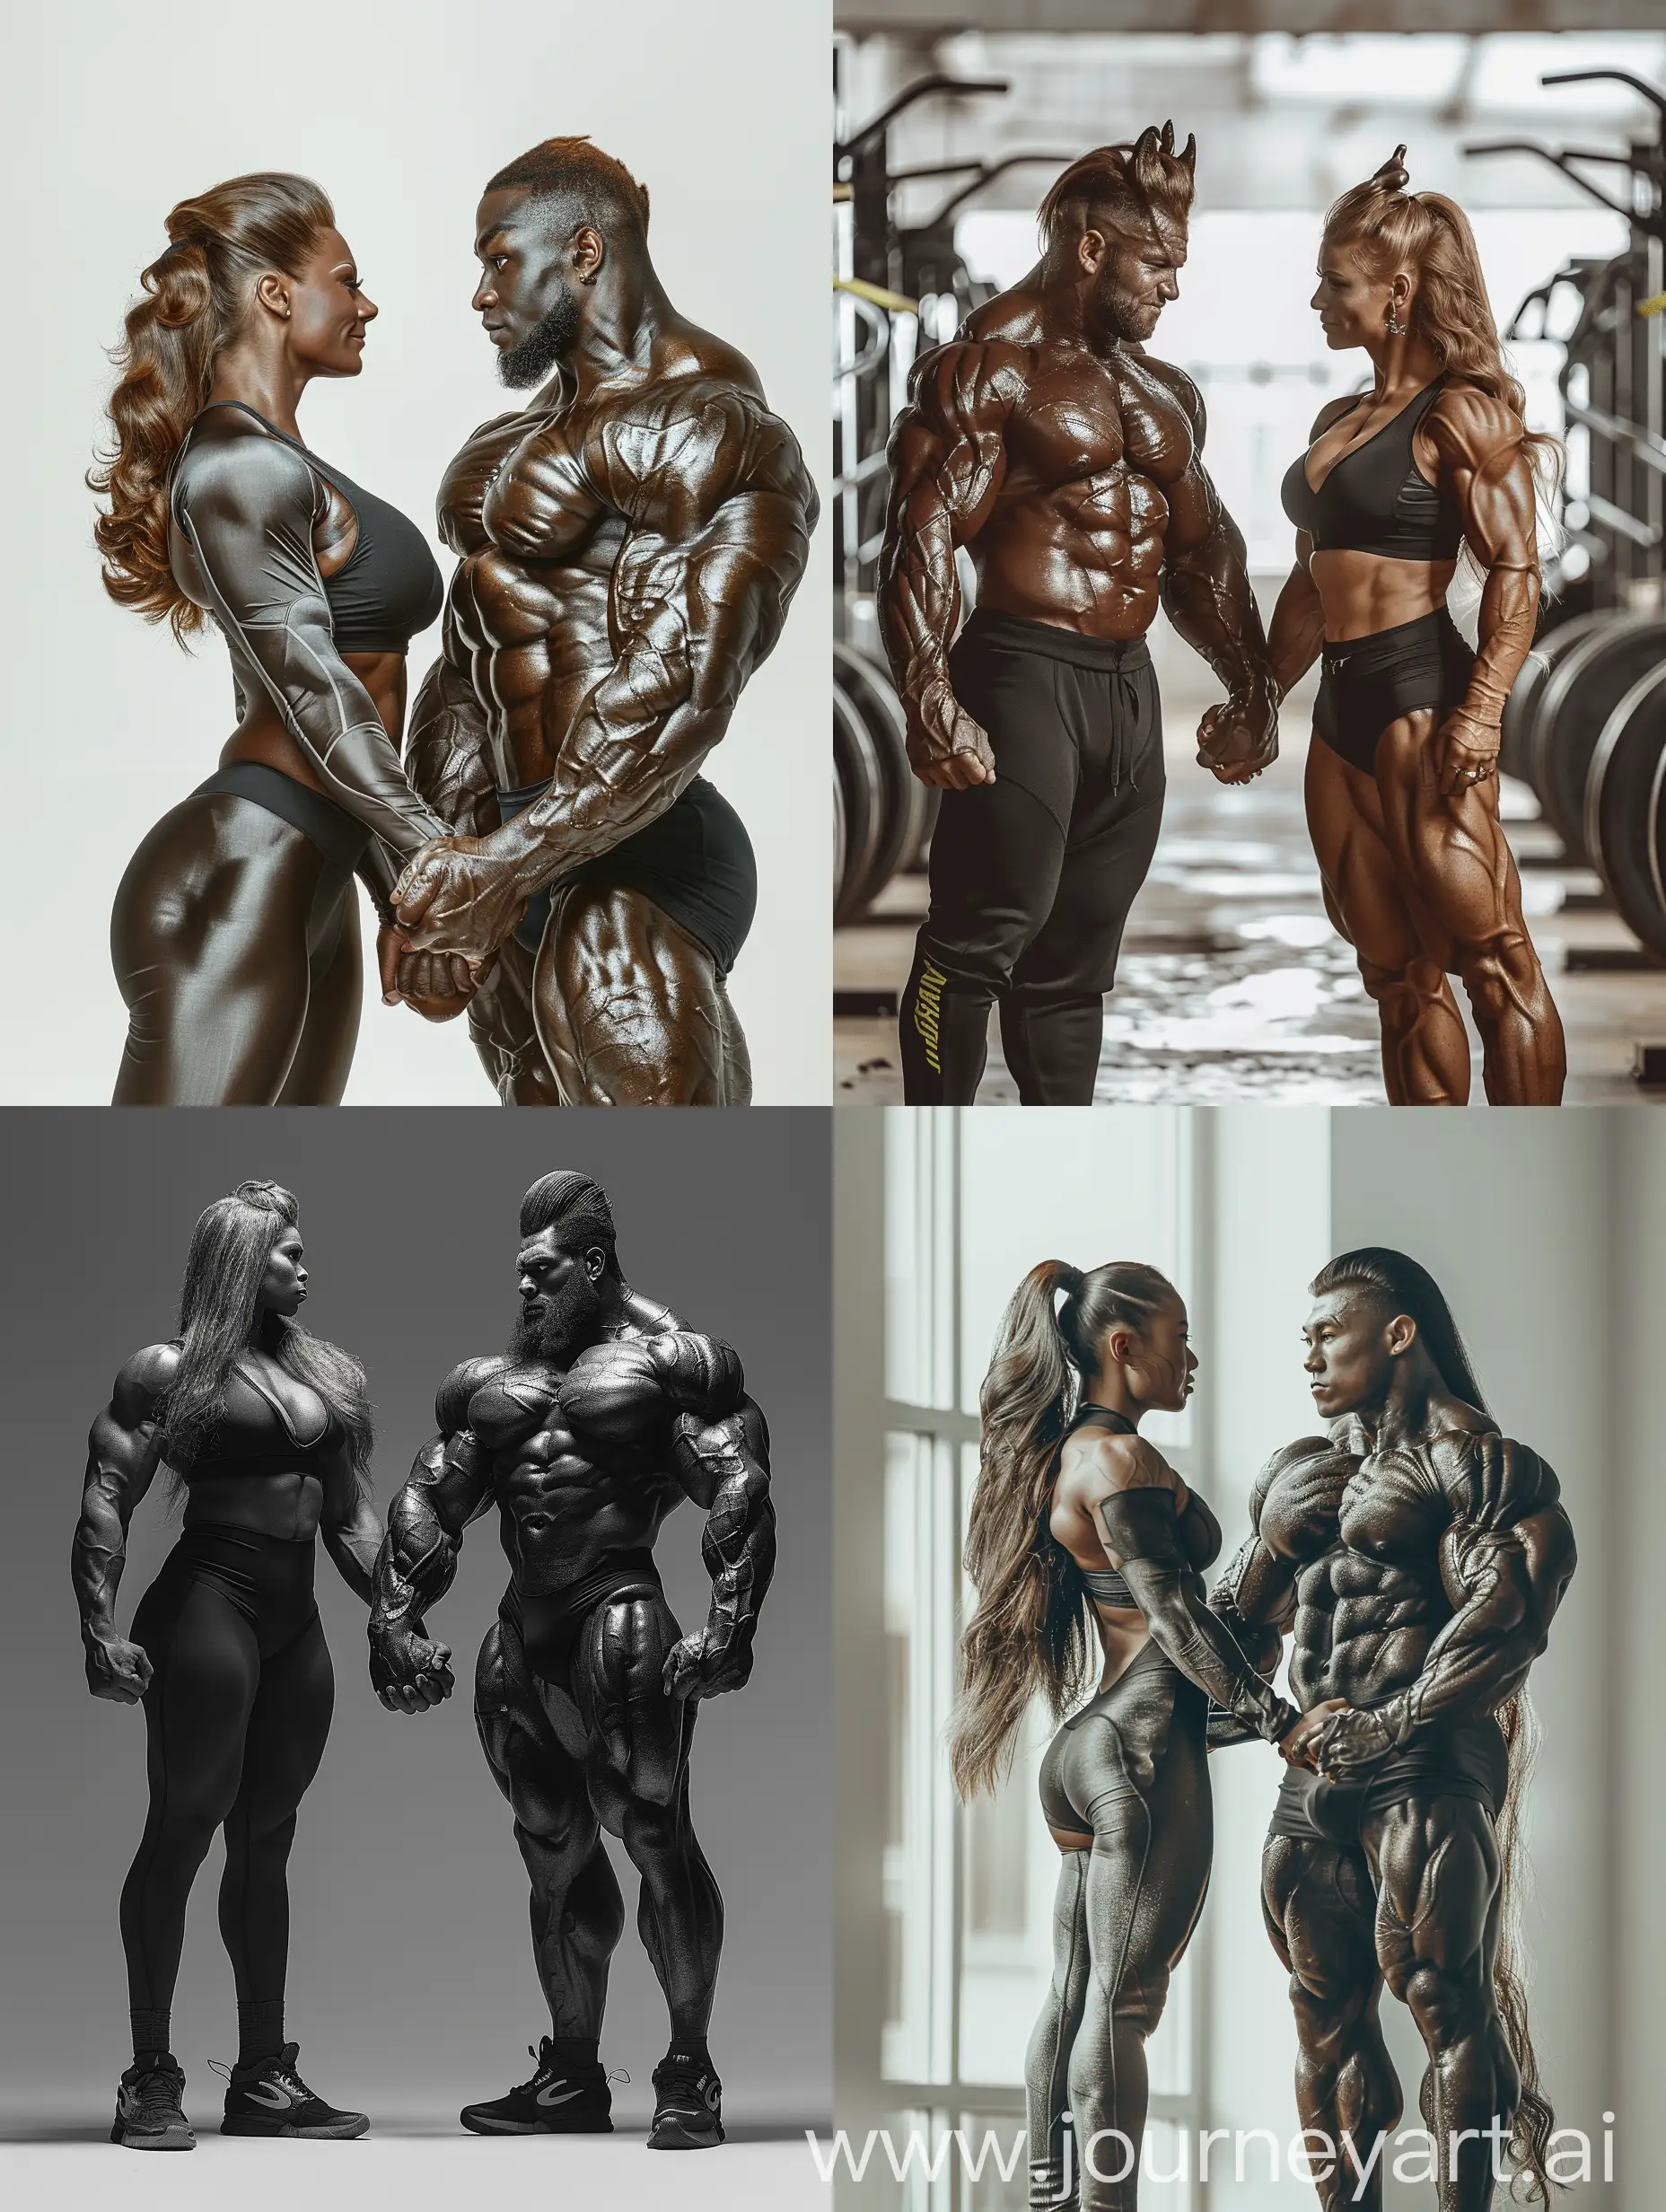 cool aestetic bodybuilders coupe of female and male beast holding hands looking at you full size